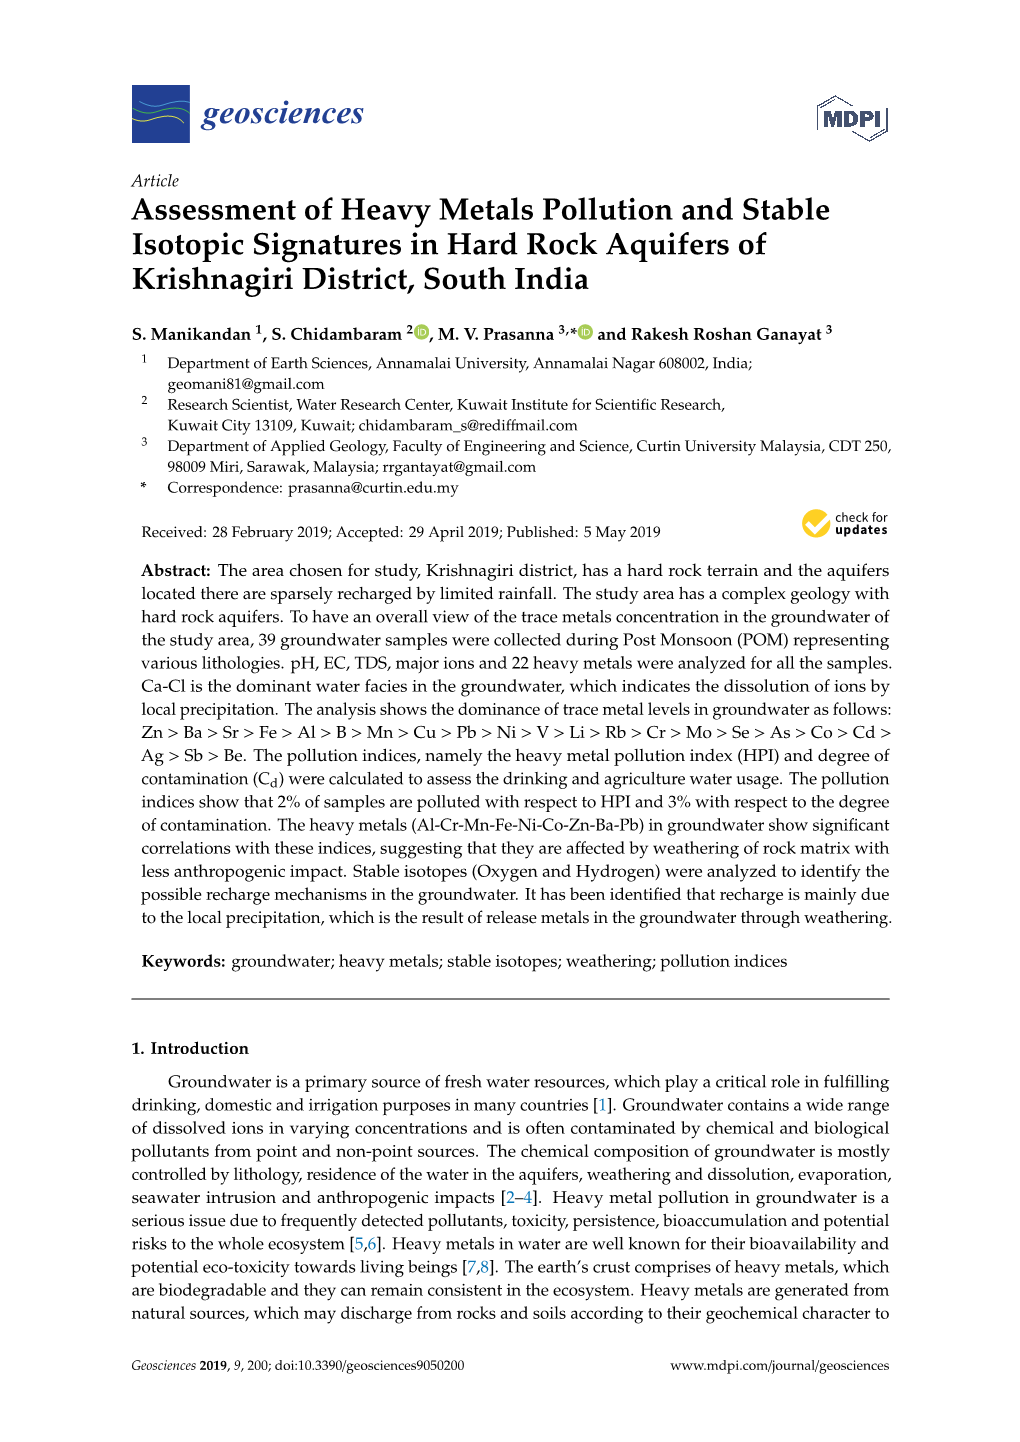 Assessment of Heavy Metals Pollution and Stable Isotopic Signatures in Hard Rock Aquifers of Krishnagiri District, South India